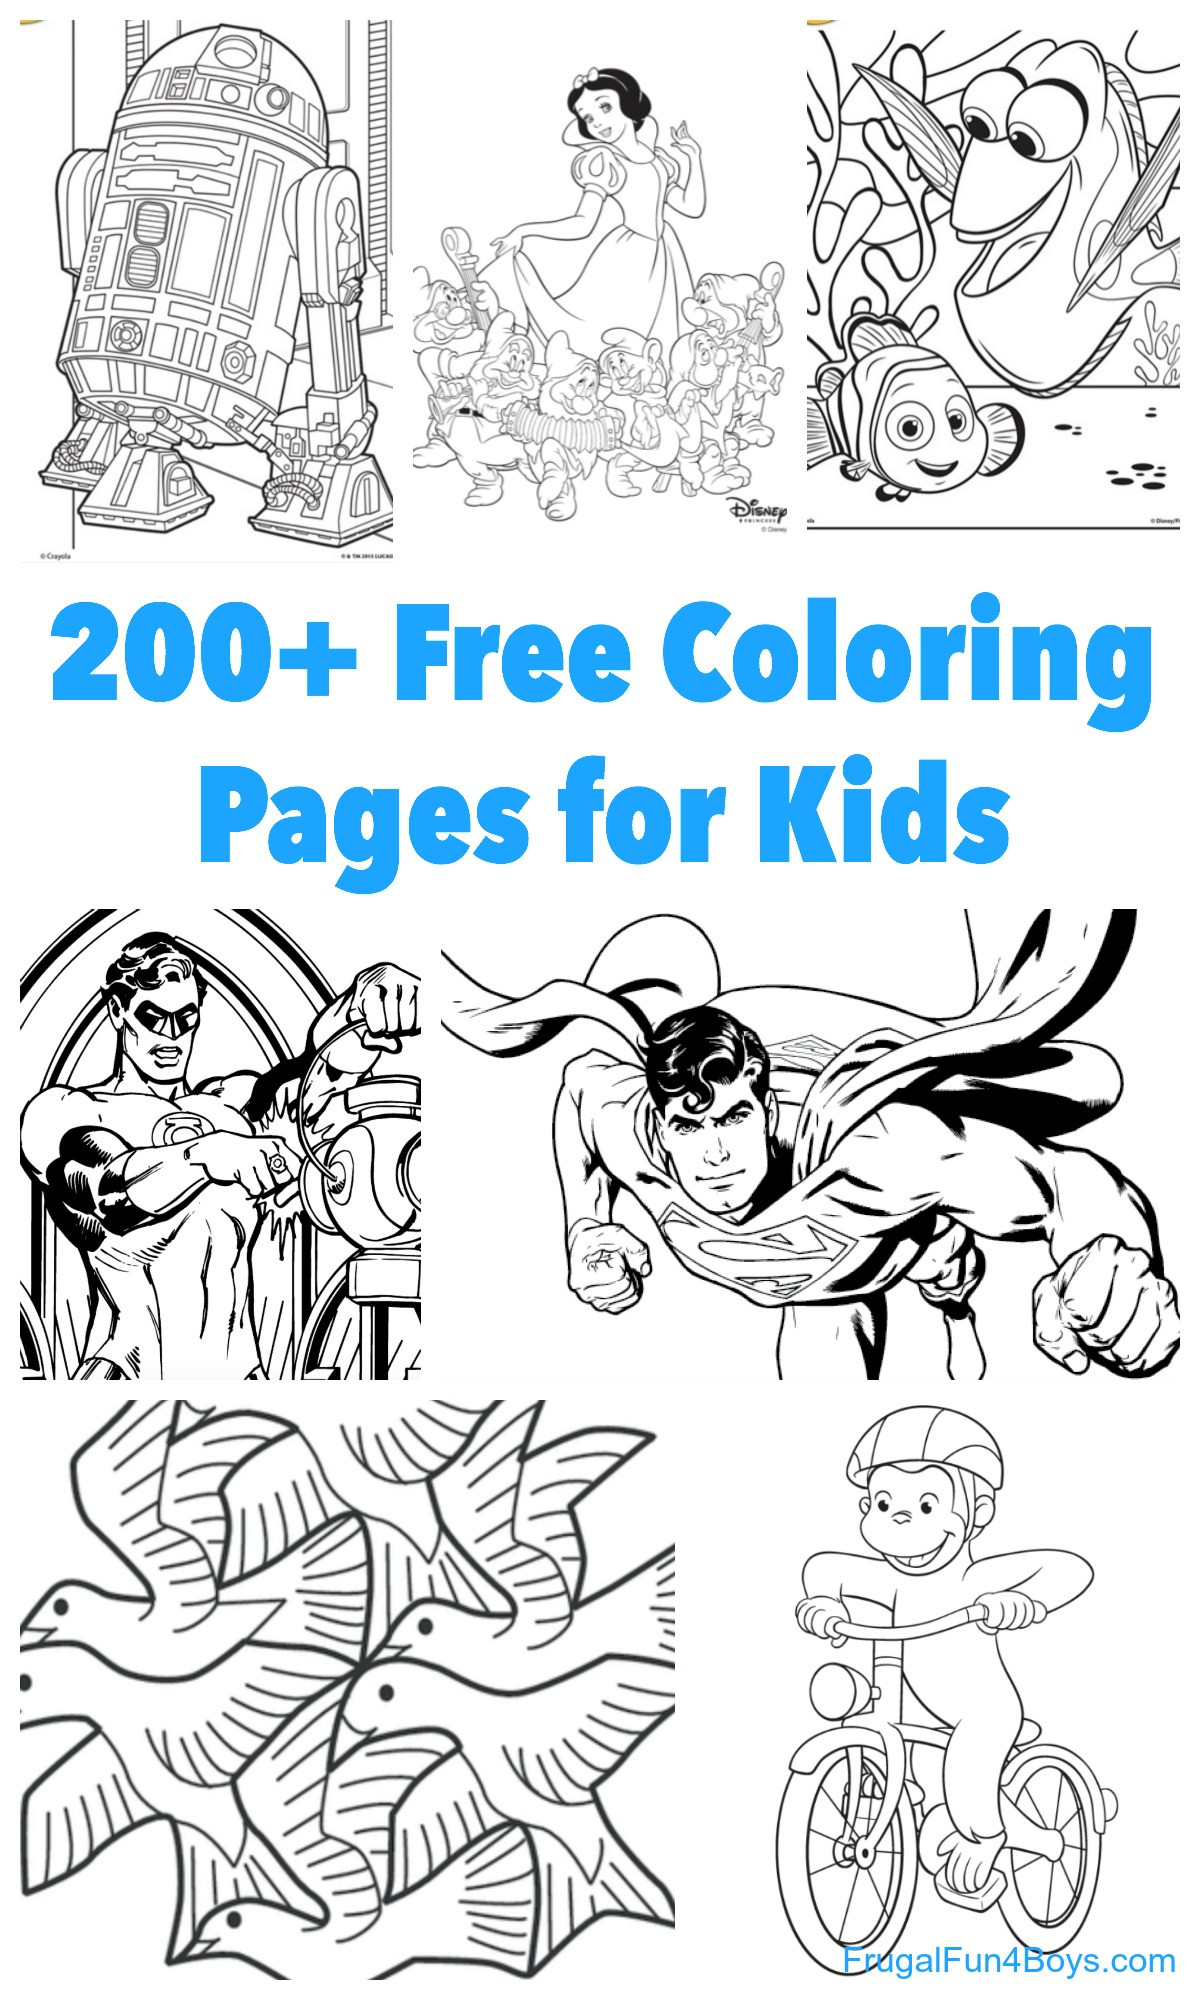 Printable Coloring Pages Girls
 200 Printable Coloring Pages for Kids Frugal Fun For